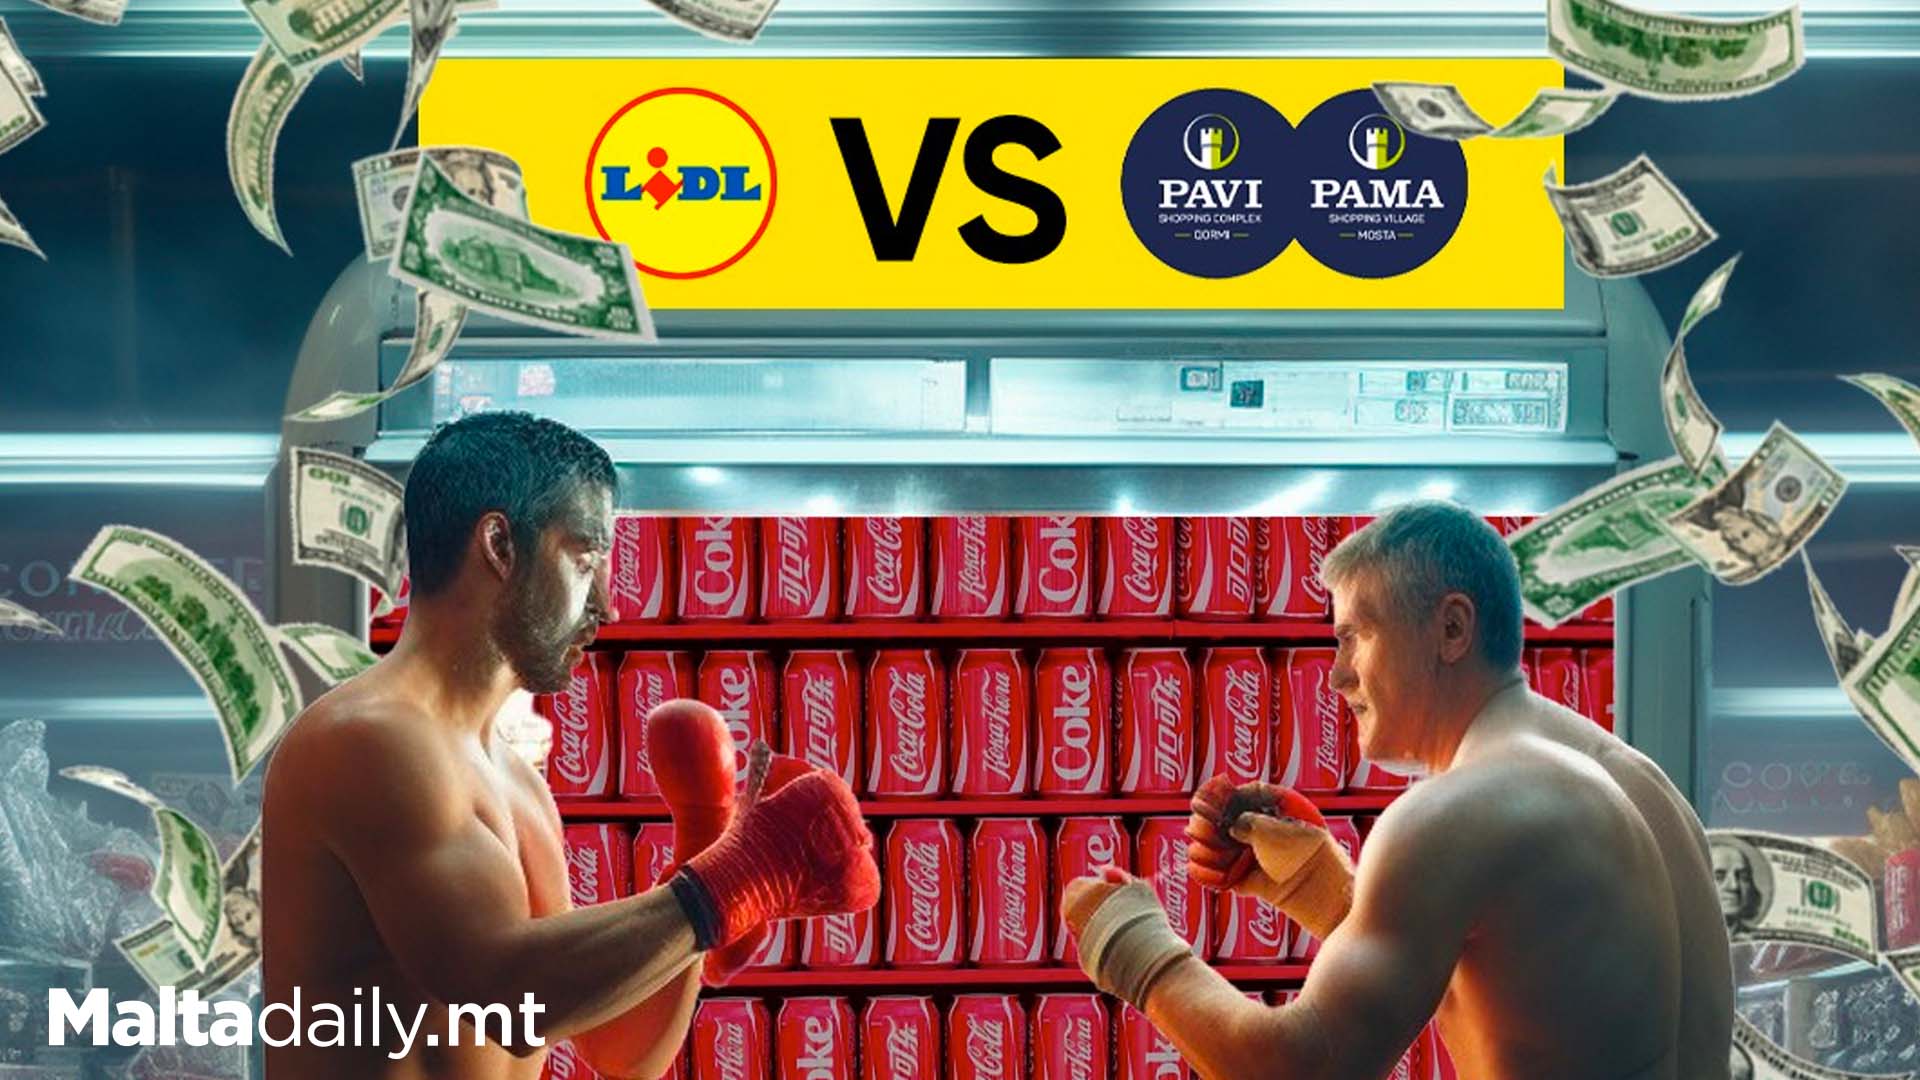 Lidl And PAVI/PAMA Engage In Social Media War Over Prices